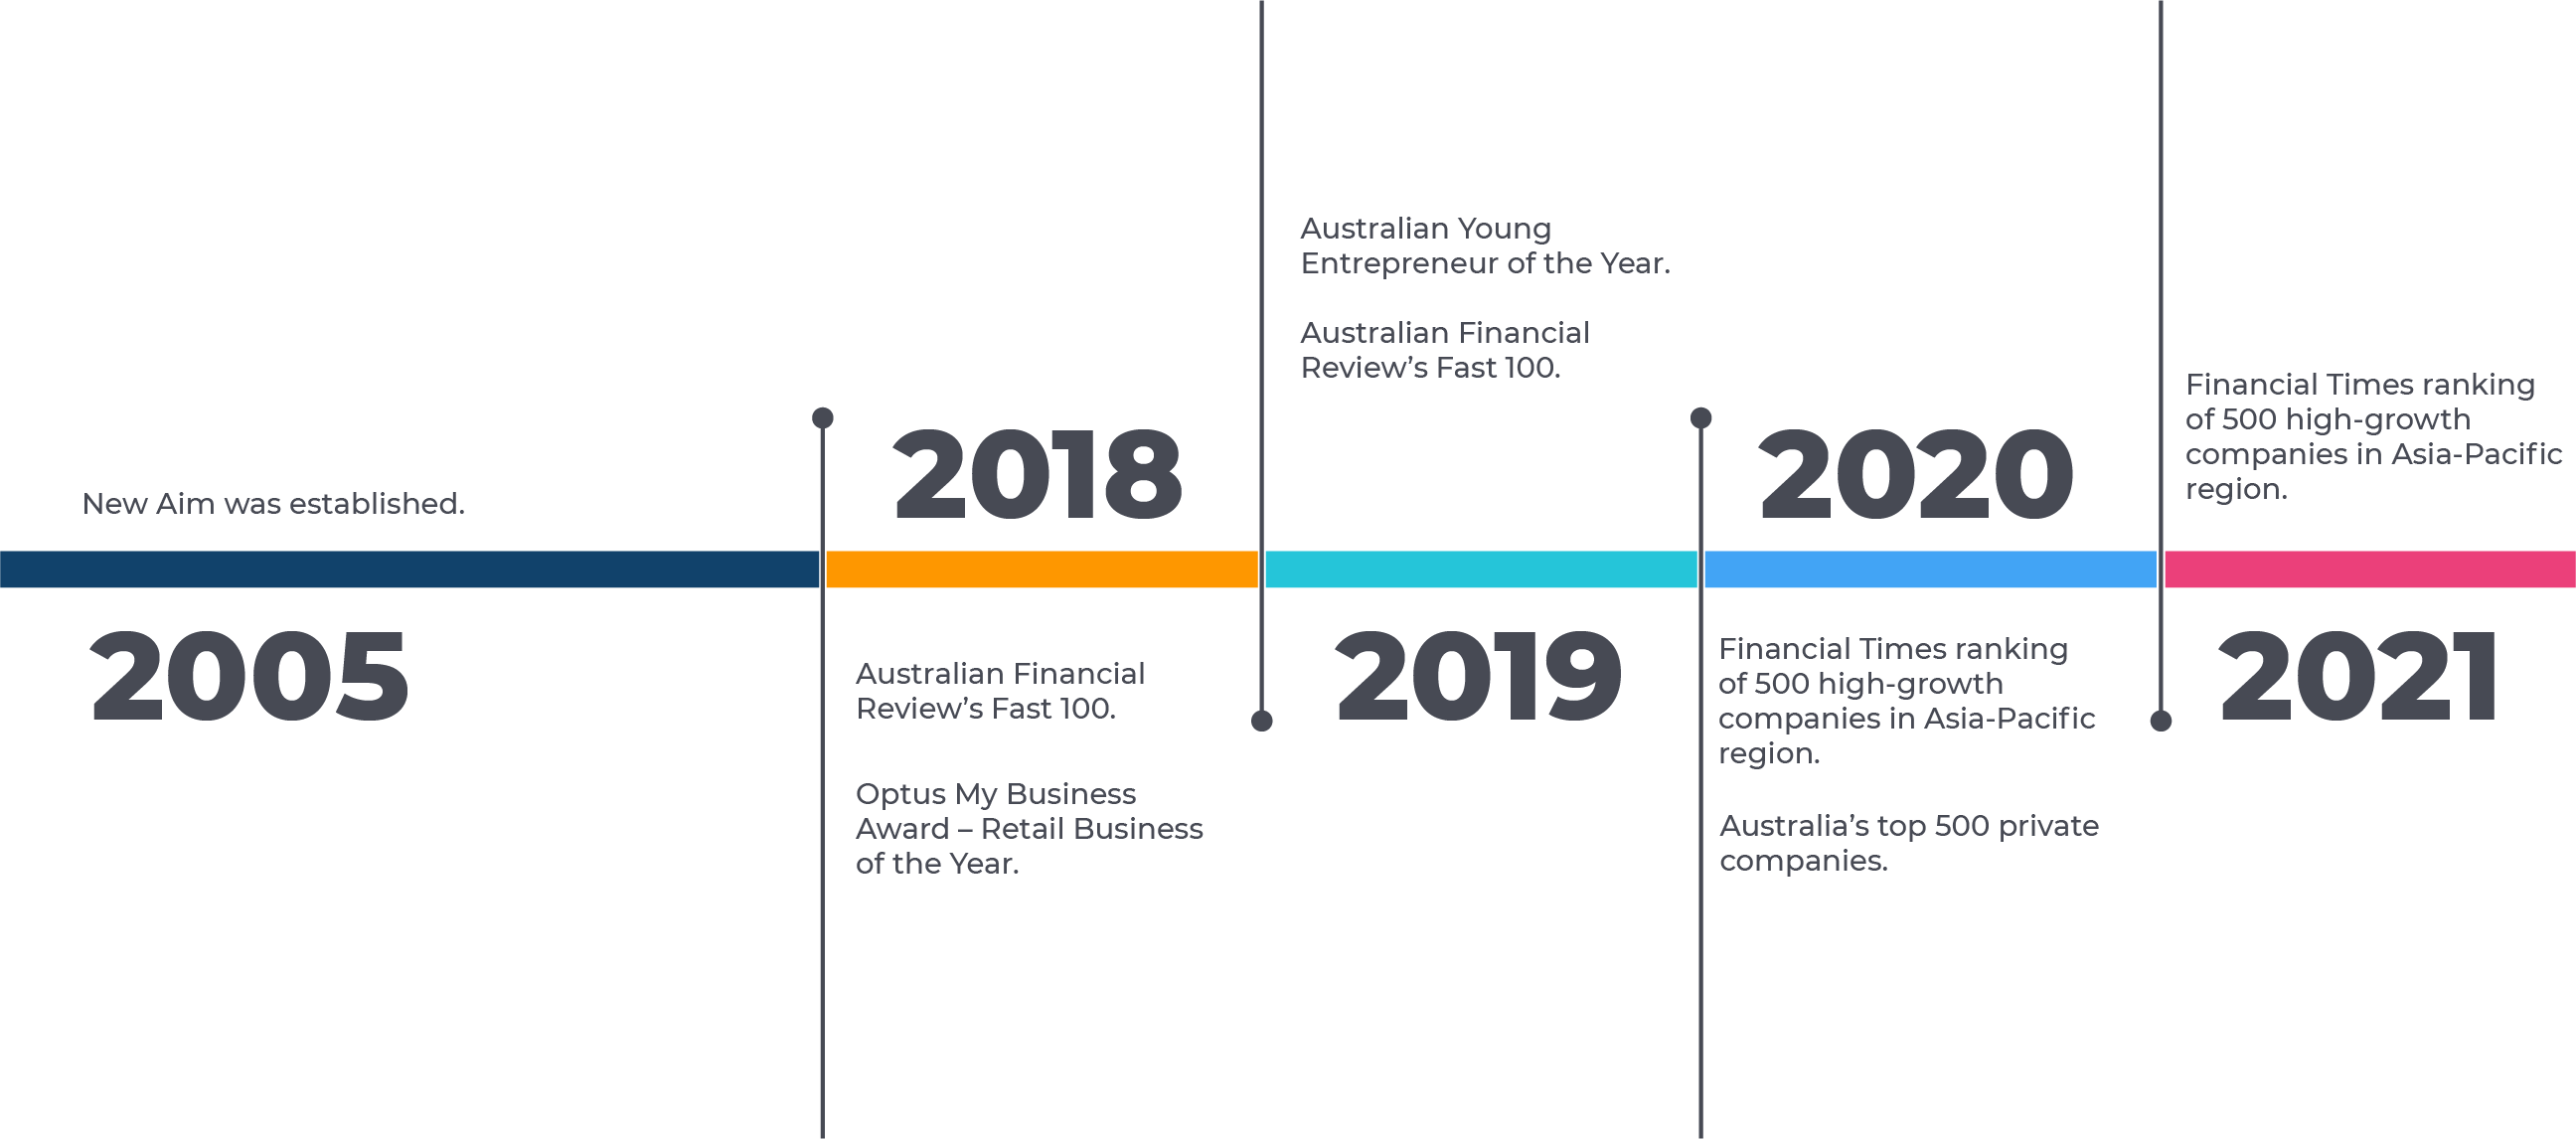 A timeline describing New Aim's history from 2005 to 2021